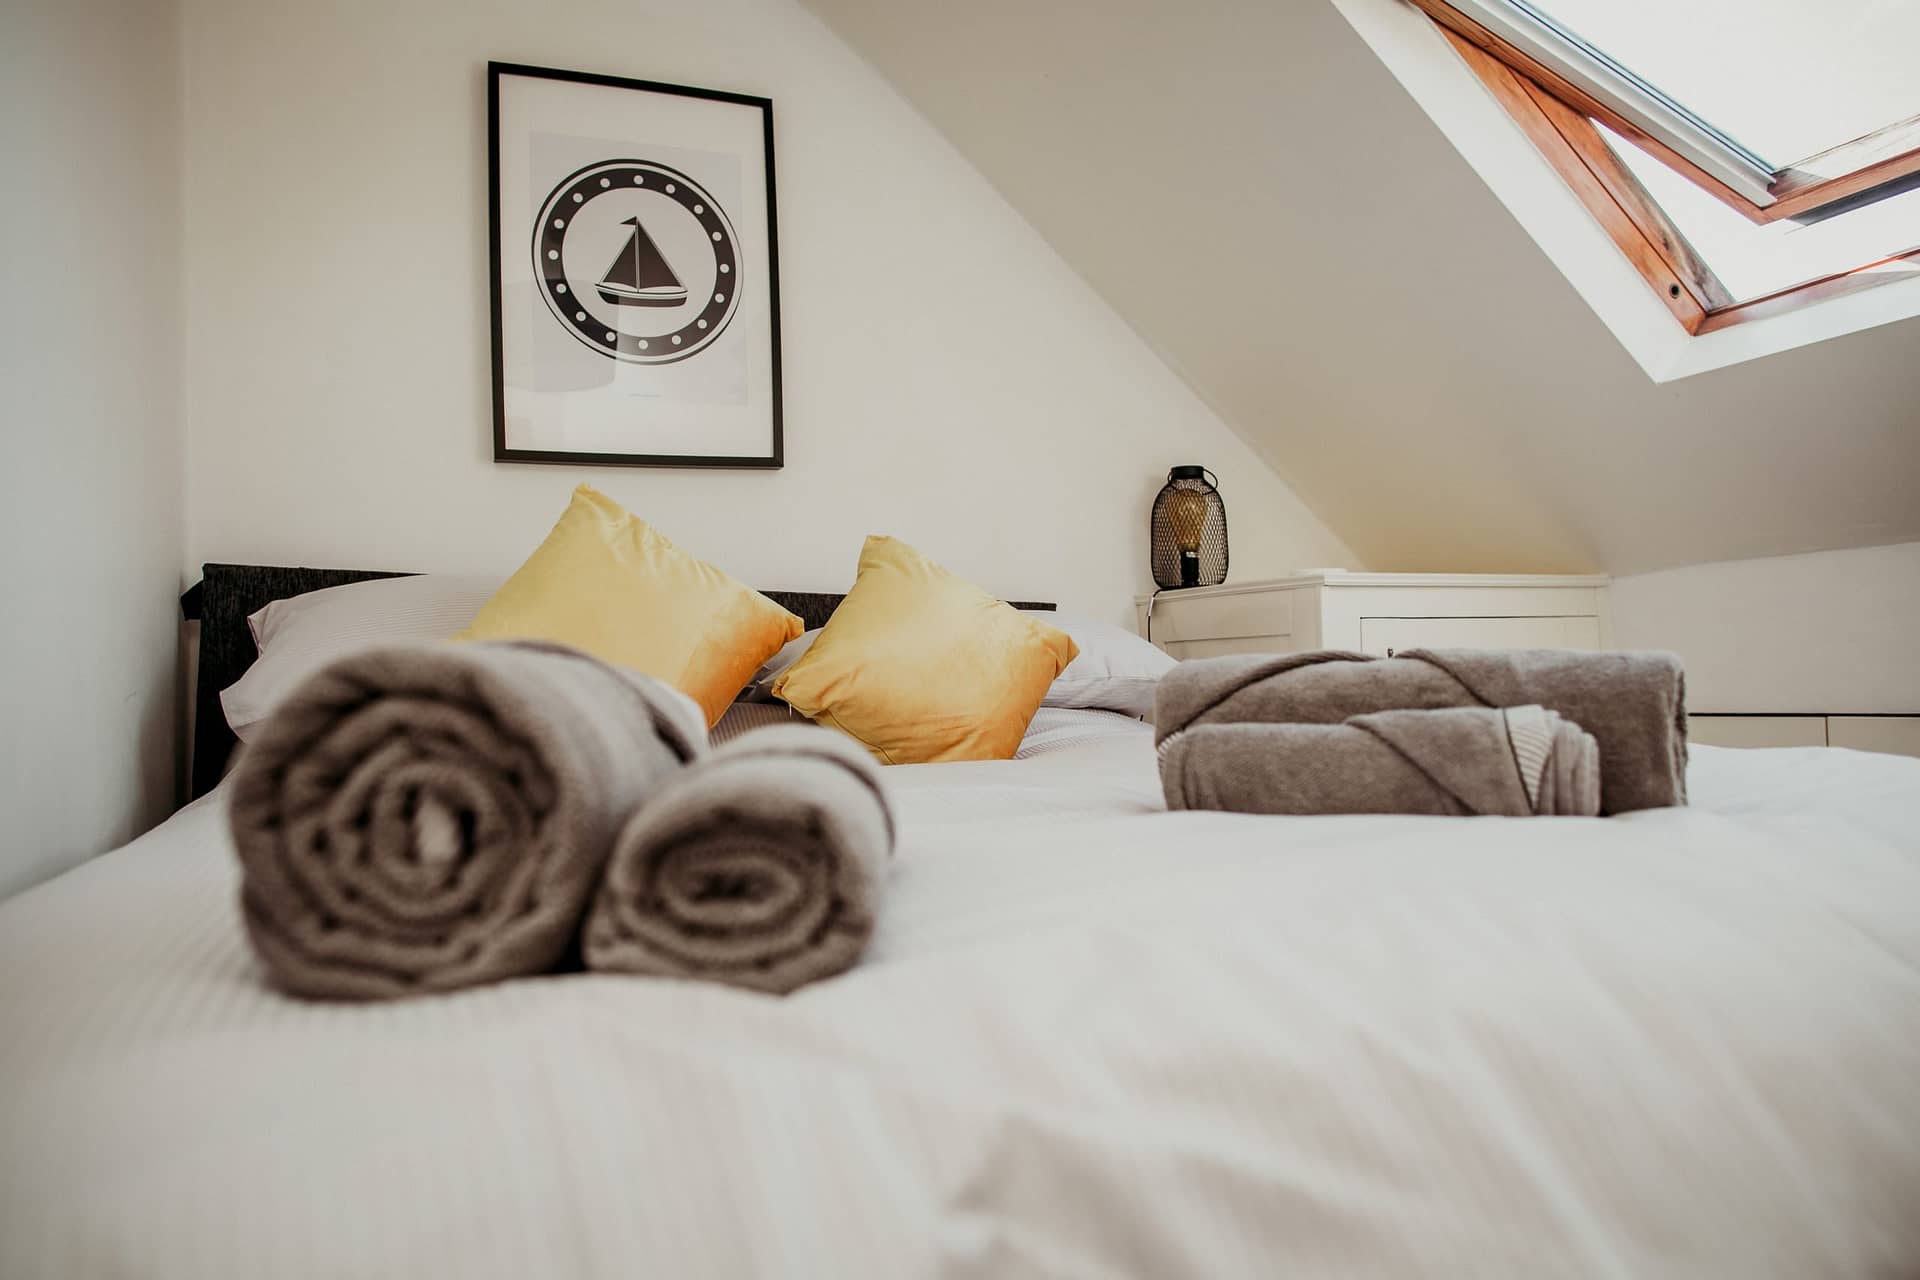 Bed linen and towels provided - The Lugger - Holiday Cottages Noss Mayo